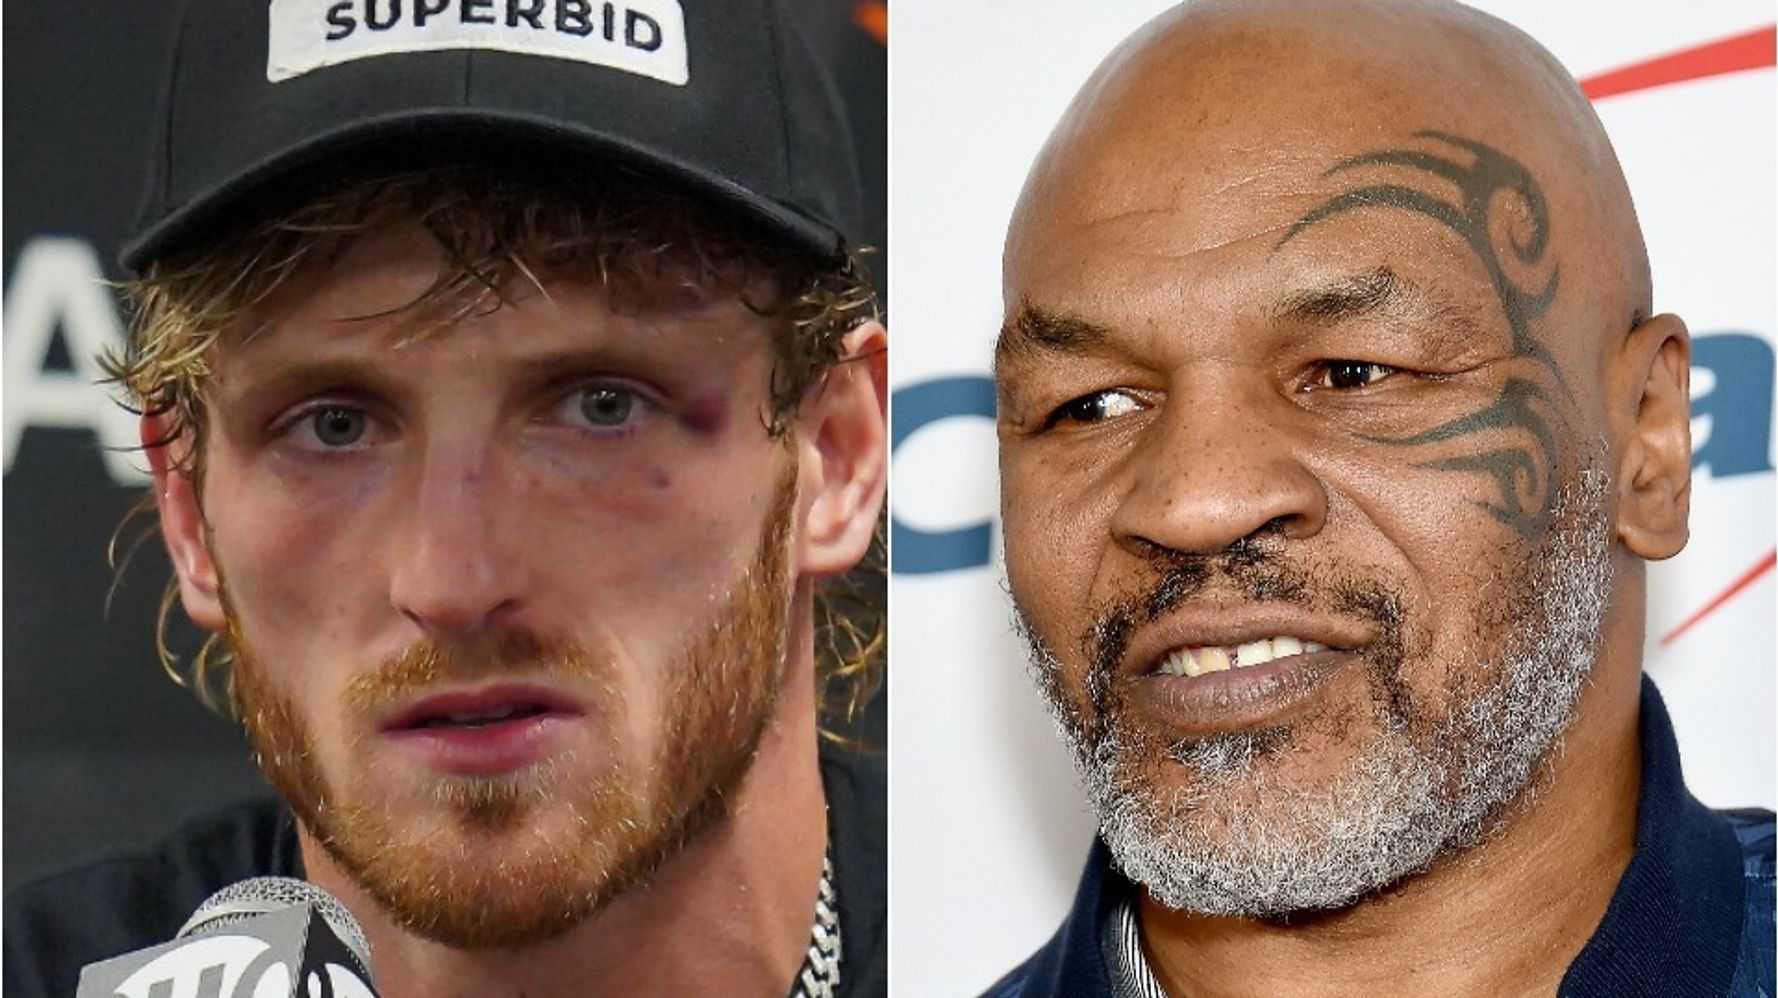 Logan Paul Thinks He Can Beat Mike Tyson: 'He's Old, Old'